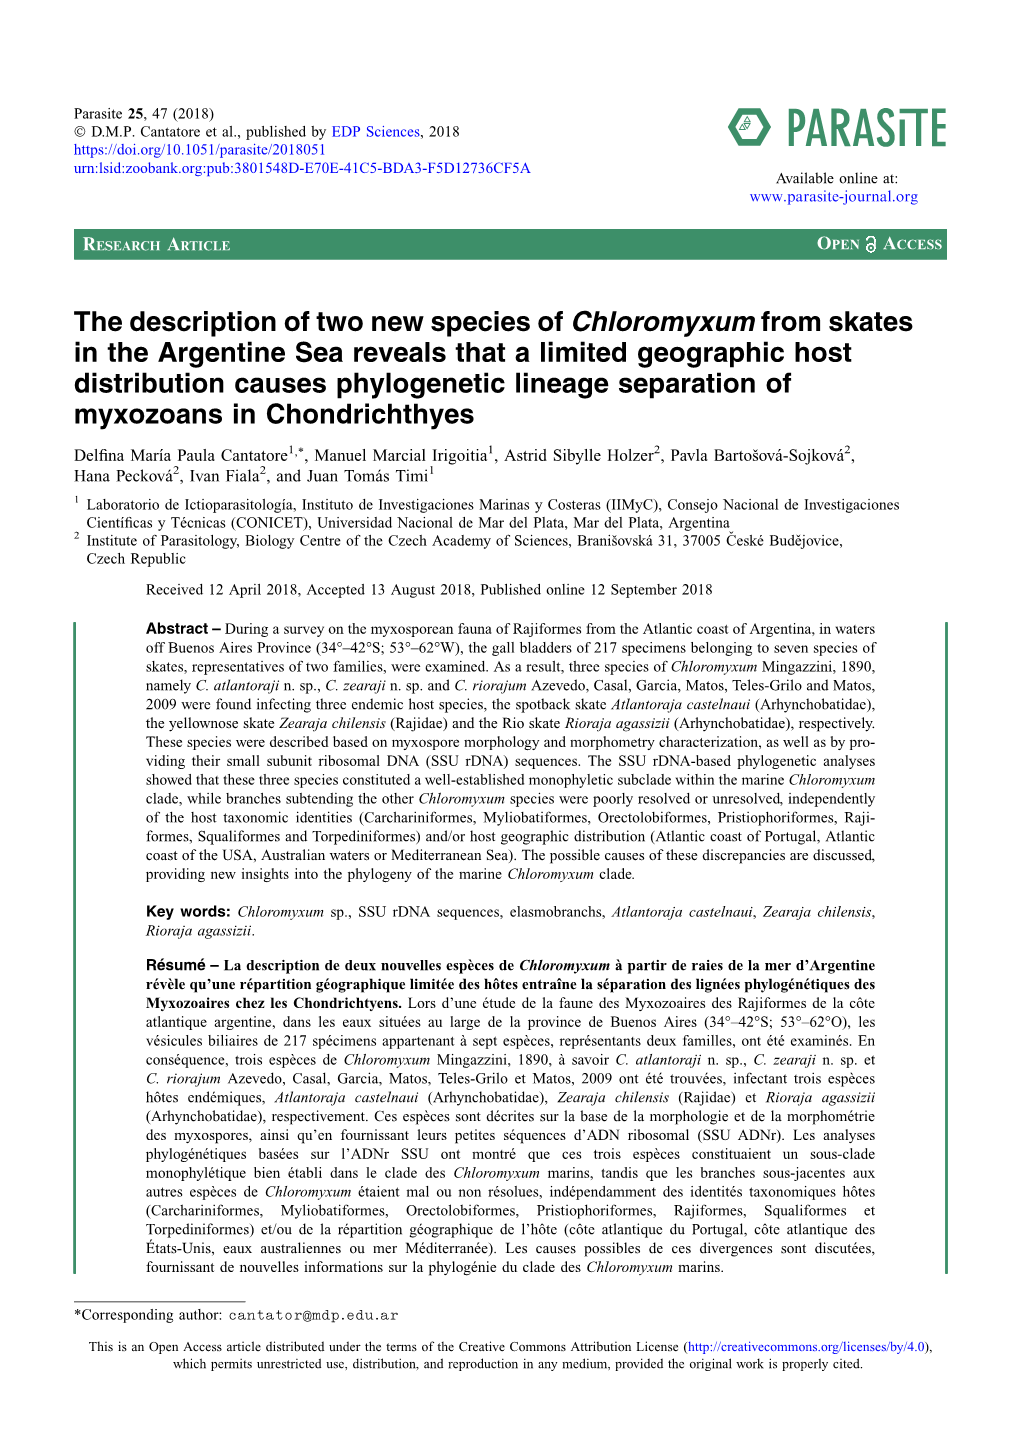 The Description of Two New Species of Chloromyxum from Skates in The